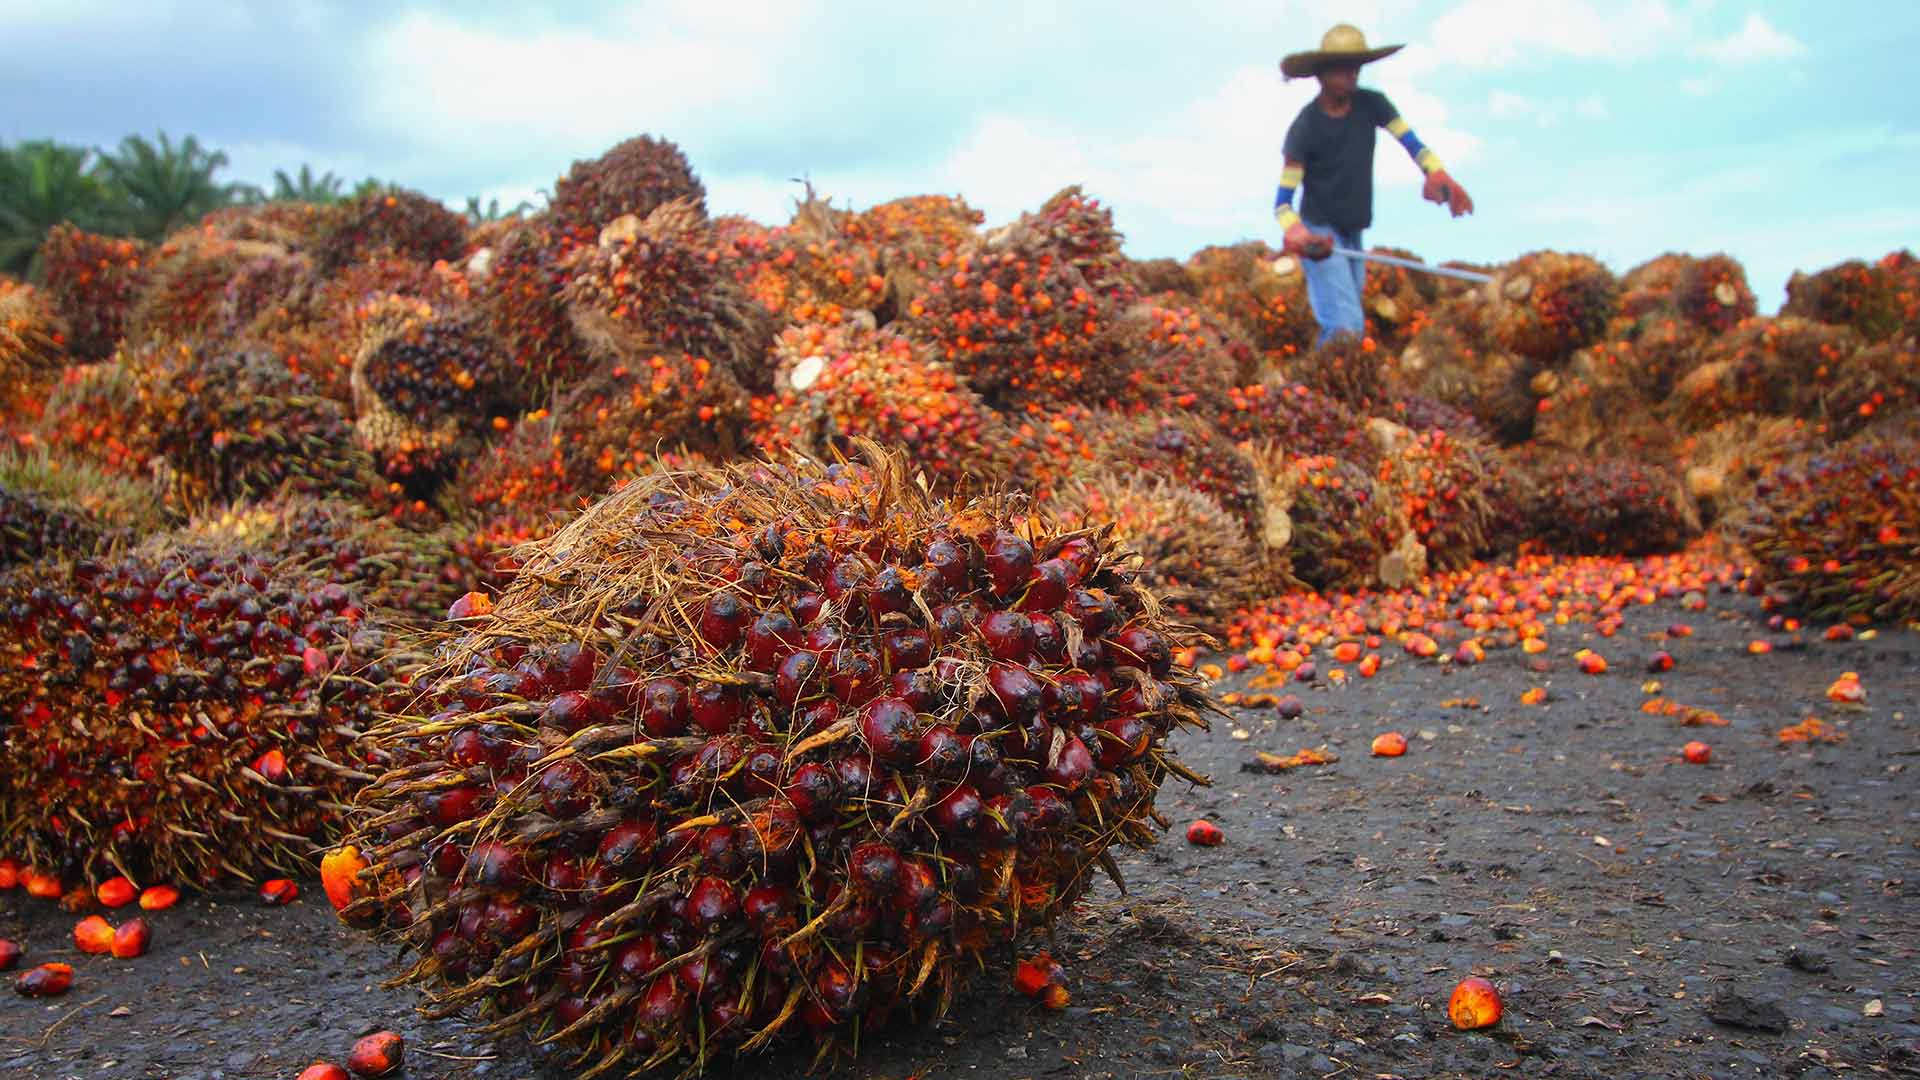  Sustainable palm oil?